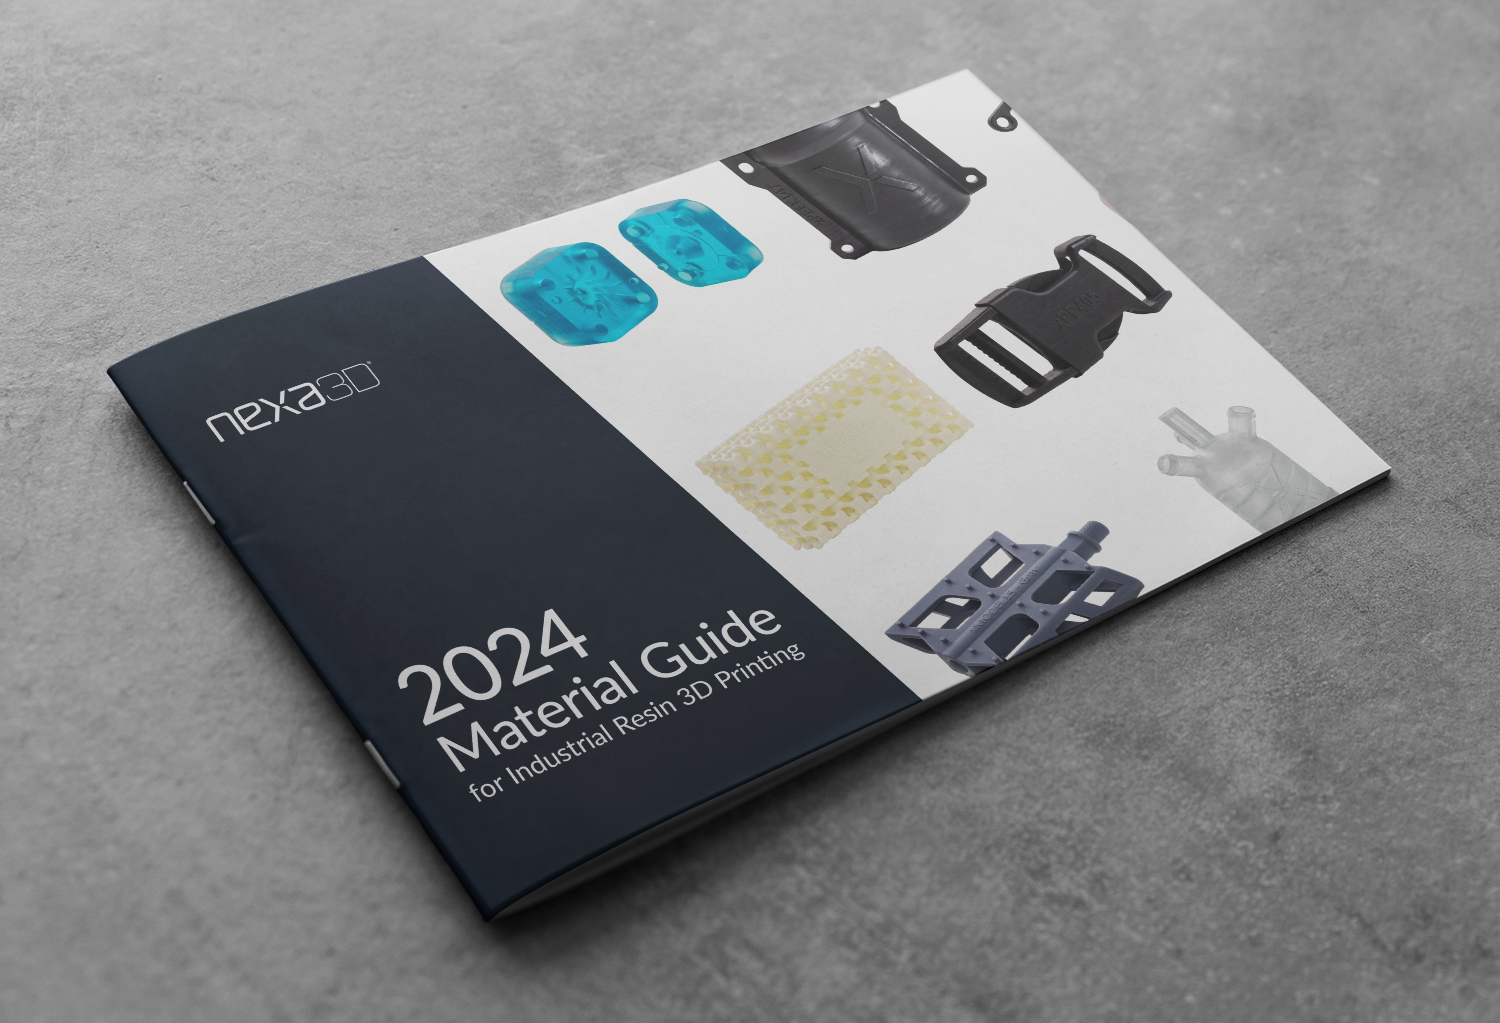 Download the 2024 Resin Material Guide